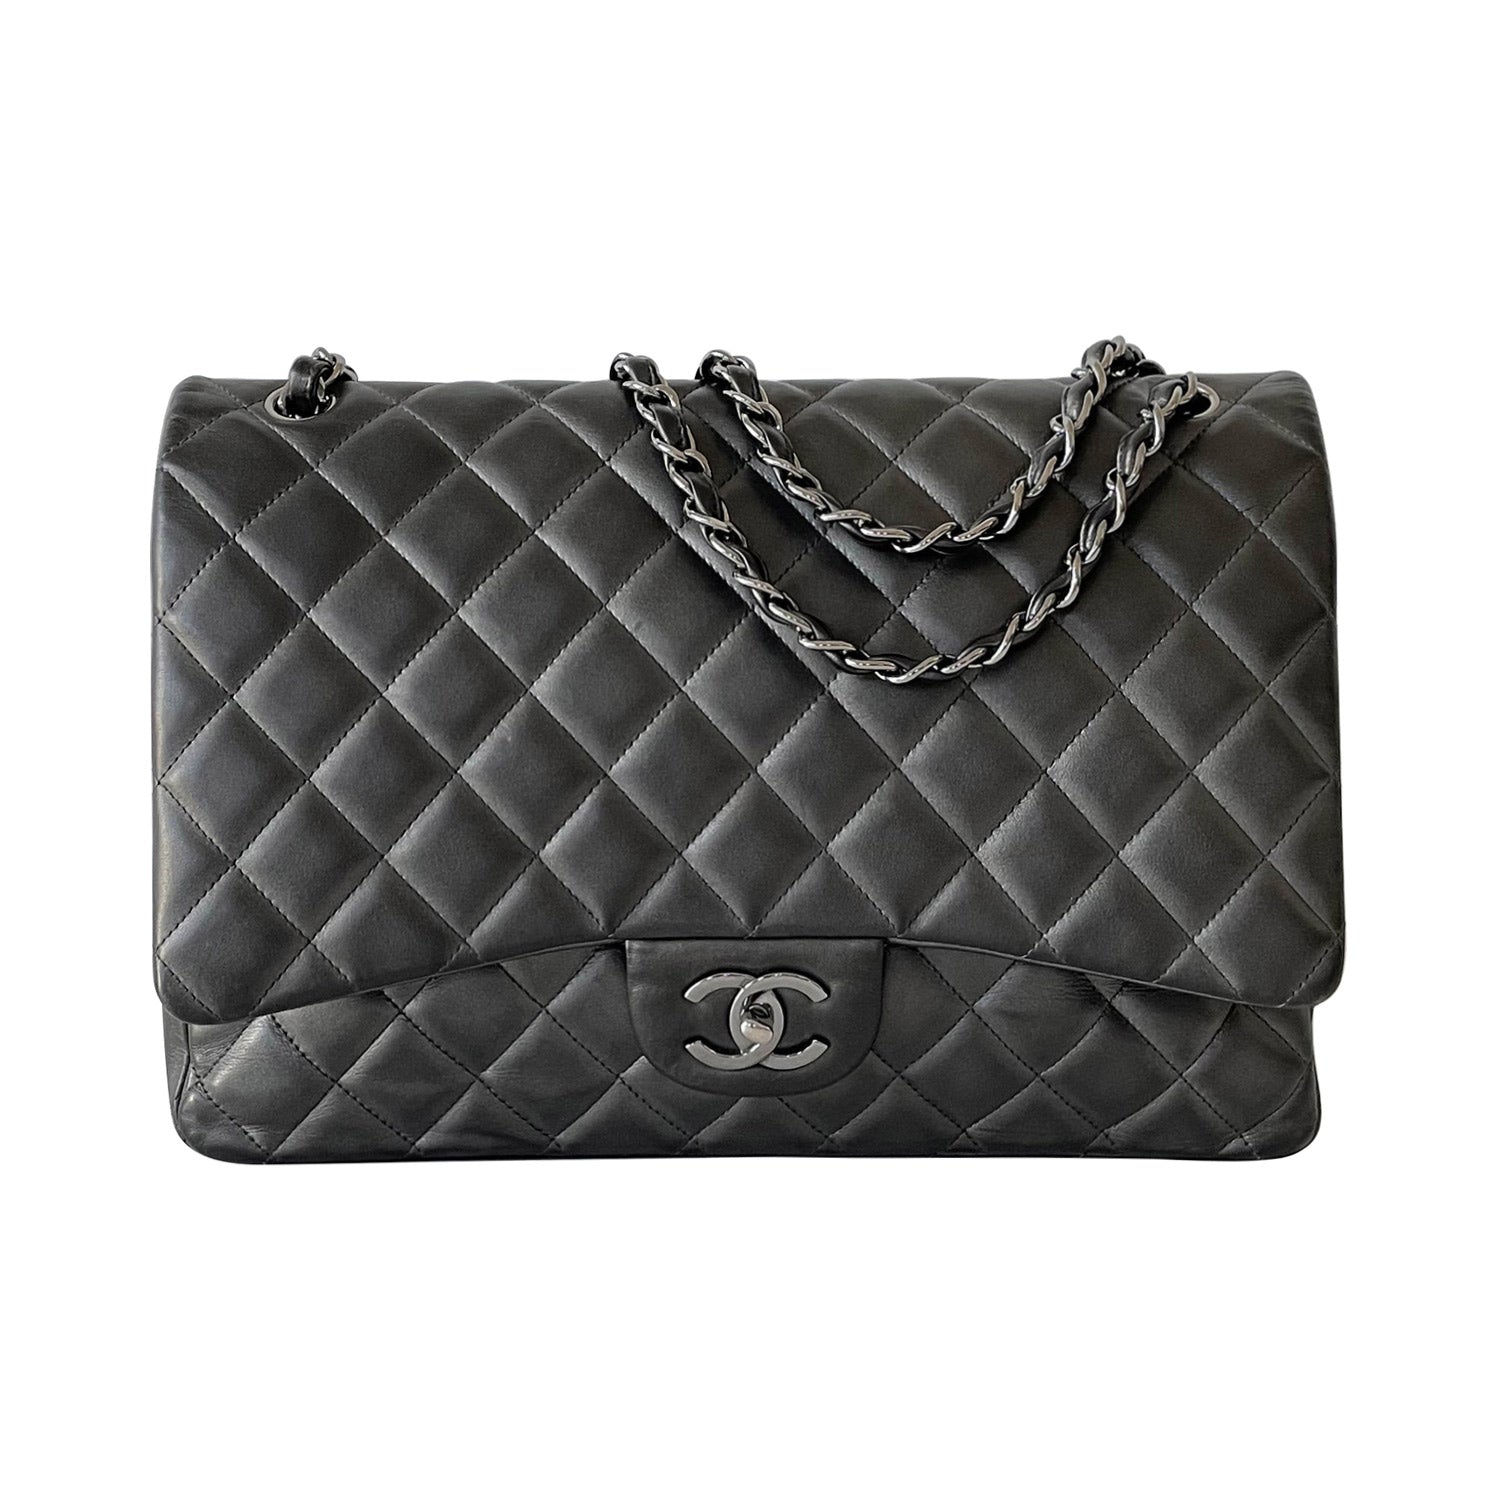 Shop authentic Chanel Classic Maxi Double Flap Bag at revogue for